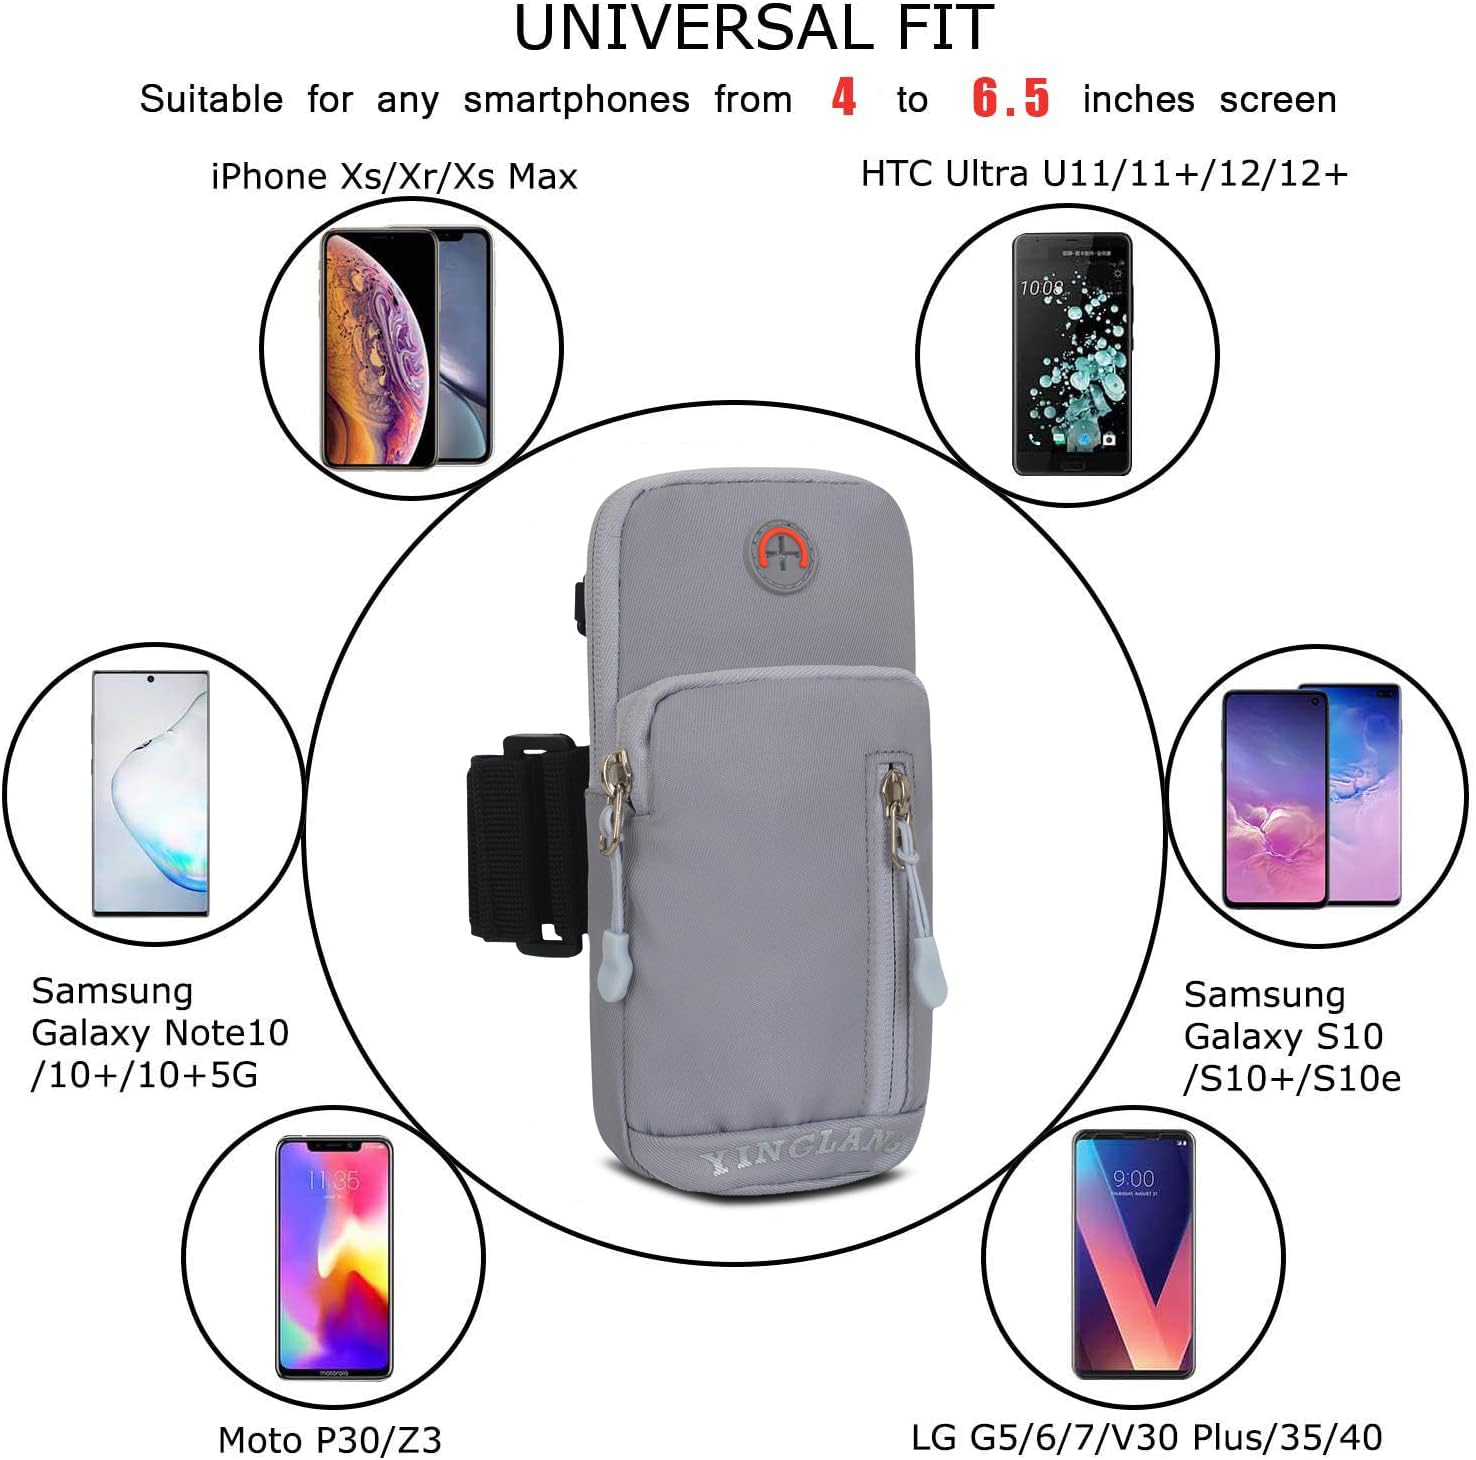 eYistar Sport Running Armband Wristband Cell Phone Holder Pouch Case Crossbody Purse Arm Bag for iPhone 13 12 Pro Max Samsung Galaxy S21 FE S20 S22 Ultra Note 10+ Plus A03S A12 Google Pixel 6 (Grey)